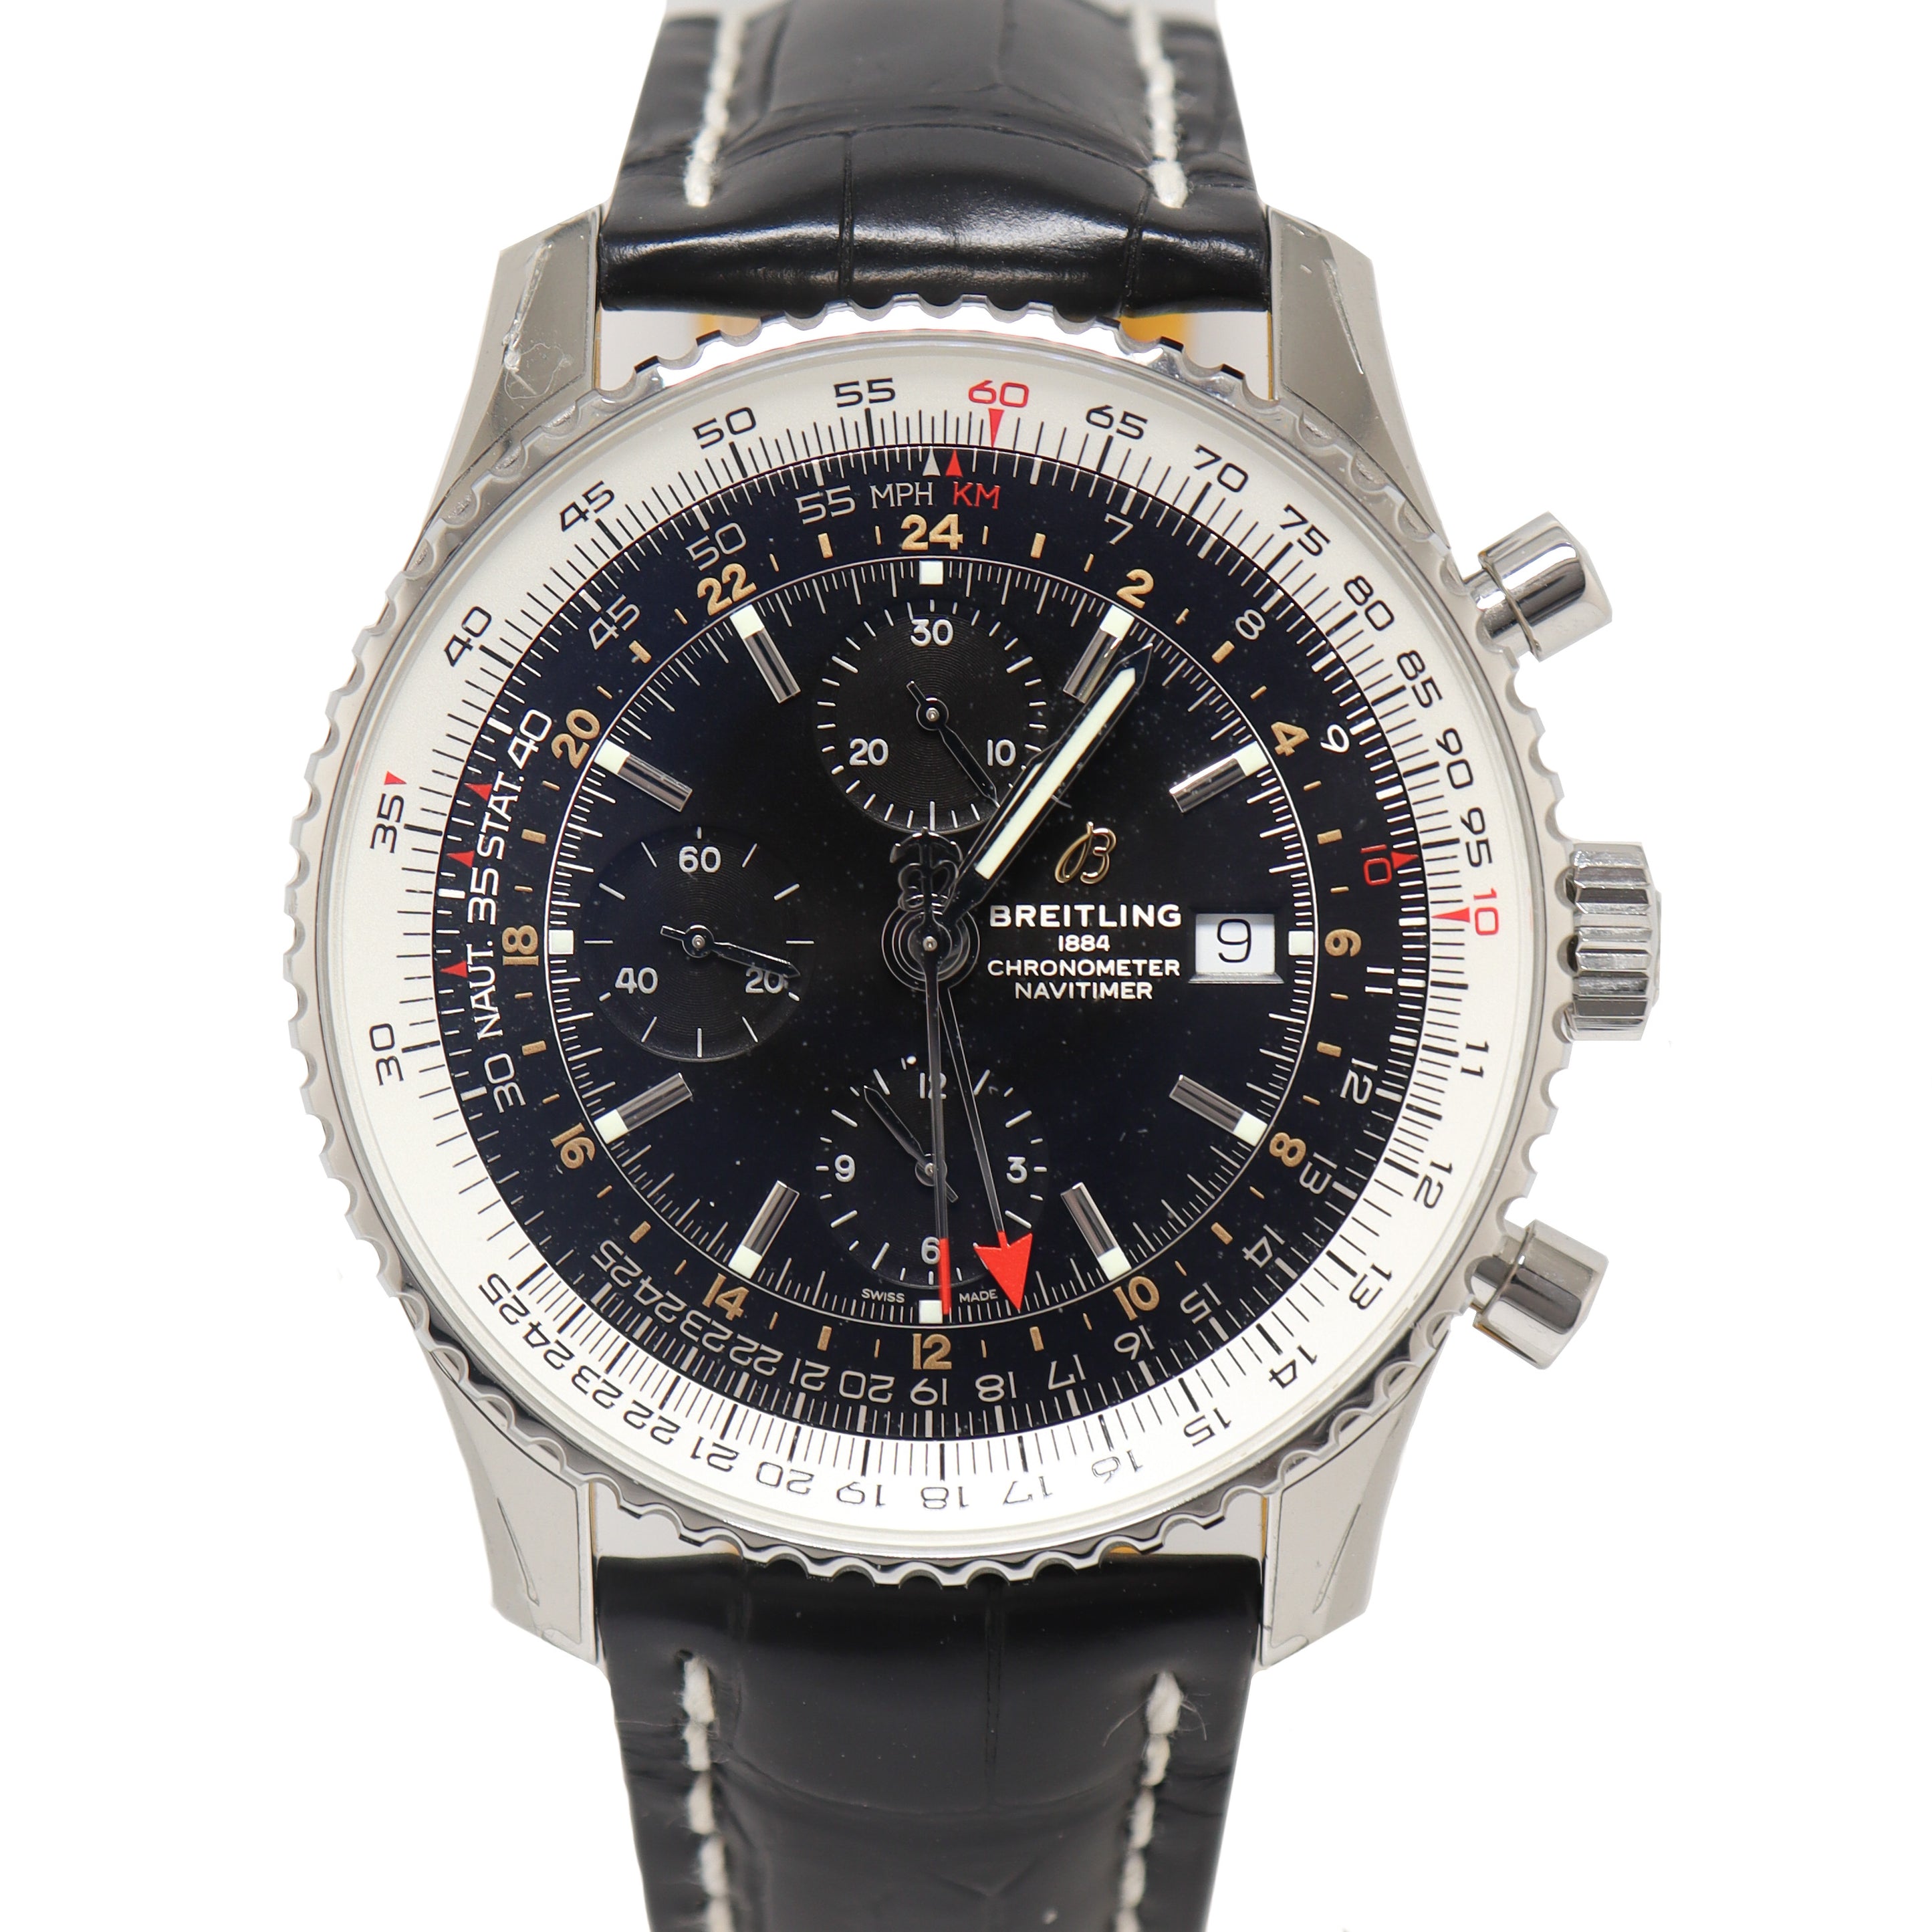 Pre-Owned Breitling Watches | Happy Jewelers